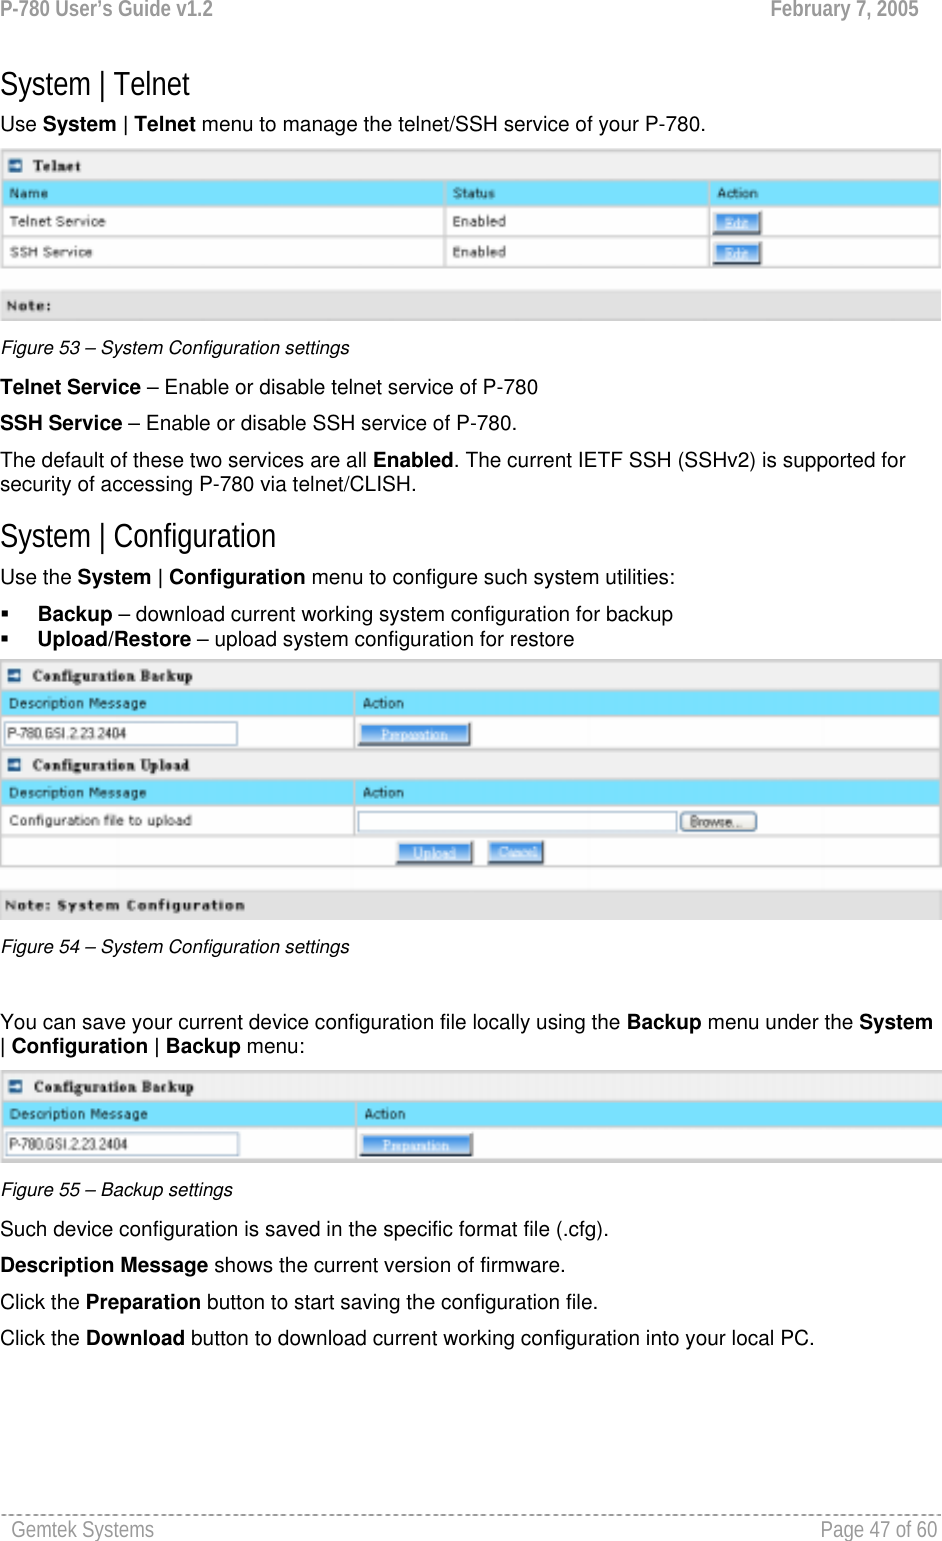 P-780 User’s Guide v1.2  February 7, 2005 Gemtek Systems    Page 47 of 60   System | Telnet Use System | Telnet menu to manage the telnet/SSH service of your P-780.   Figure 53 – System Configuration settings Telnet Service – Enable or disable telnet service of P-780 SSH Service – Enable or disable SSH service of P-780.  The default of these two services are all Enabled. The current IETF SSH (SSHv2) is supported for security of accessing P-780 via telnet/CLISH.  System | Configuration Use the System | Configuration menu to configure such system utilities:  Backup – download current working system configuration for backup  Upload/Restore – upload system configuration for restore  Figure 54 – System Configuration settings  You can save your current device configuration file locally using the Backup menu under the System | Configuration | Backup menu:  Figure 55 – Backup settings Such device configuration is saved in the specific format file (.cfg). Description Message shows the current version of firmware. Click the Preparation button to start saving the configuration file. Click the Download button to download current working configuration into your local PC.  